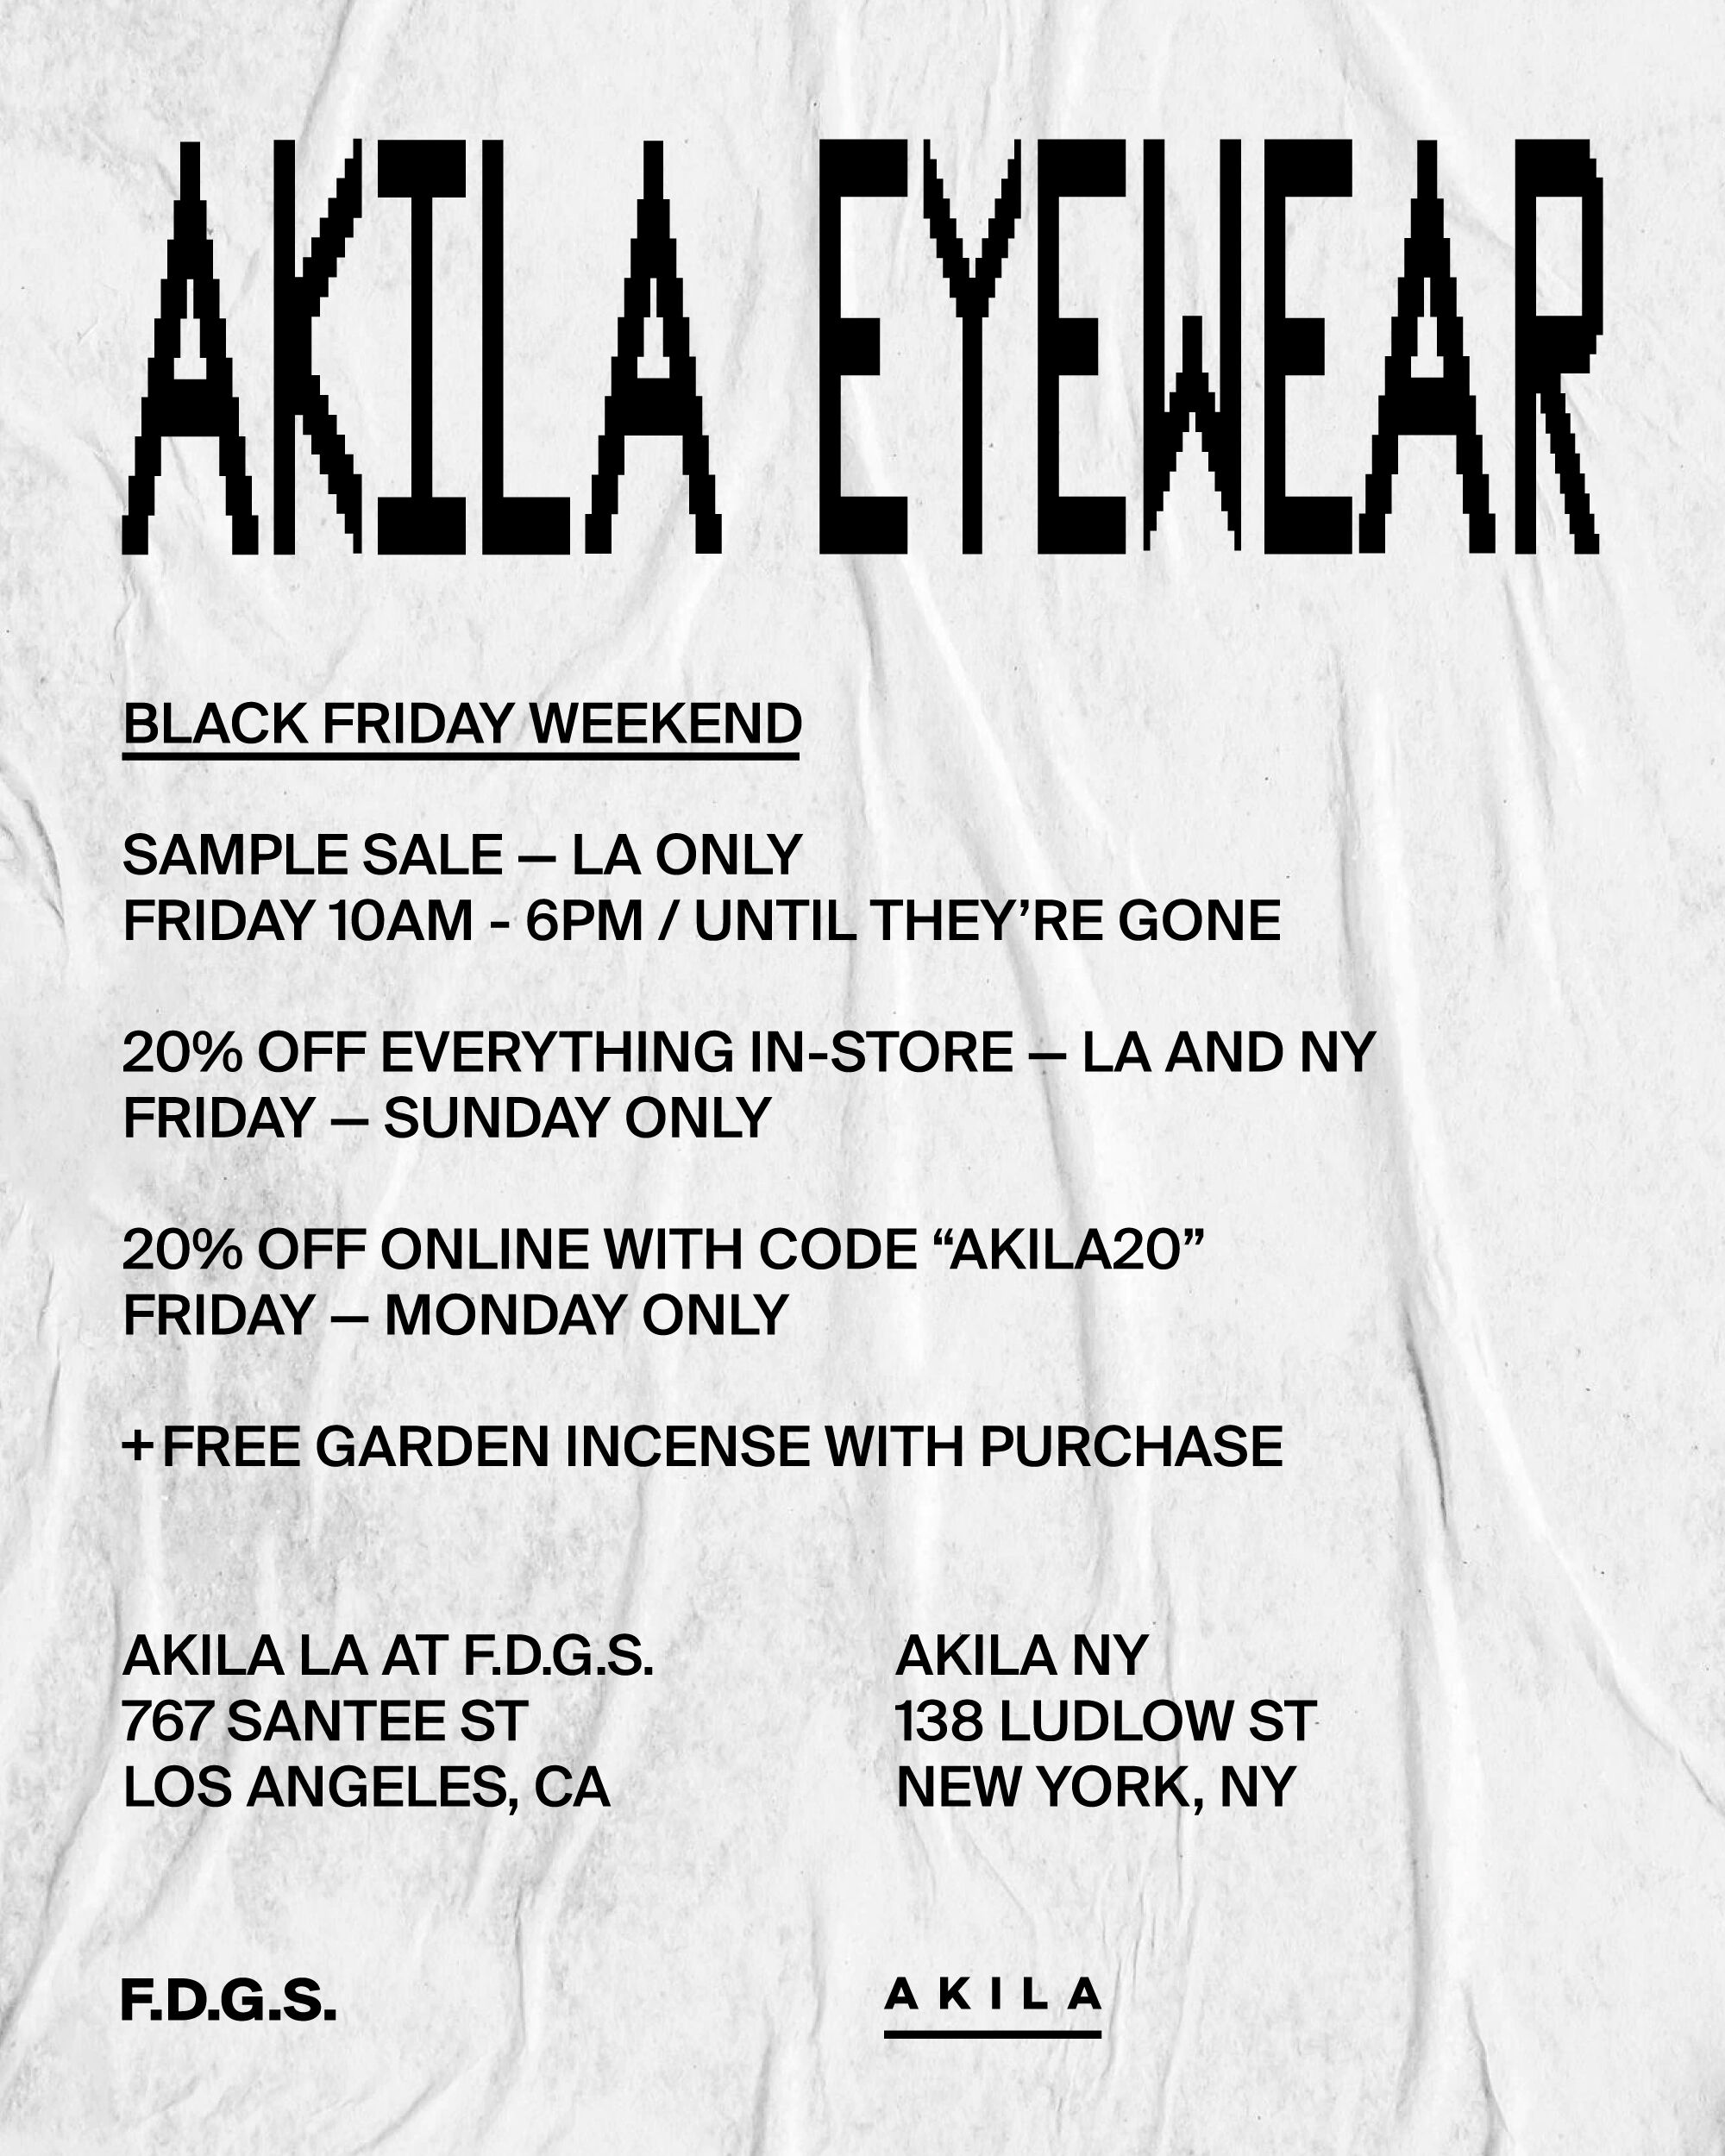 A LTEAEA BLACK FRIDAY WEEKEND SAMPLE SALE LA ONLY FRIDAY 10AM - 6PM UNTIL THEY'RE GONE 20% OFF EVERYTHING IN-STORE LA AND NY FRIDAY SUNDAY ONLY 20% OFF ONLINE WITH CODE AKILA20 FRIDAY MONDAY ONLY FREE GARDEN INCENSE WITH PURCHASE AKILA LA AT FD.G.S. AKILA NY 767 SANTEE ST 138 LUDLOW ST LOS ANGELES, CA NEW YORK, NY F.D.G.S. AKILA 